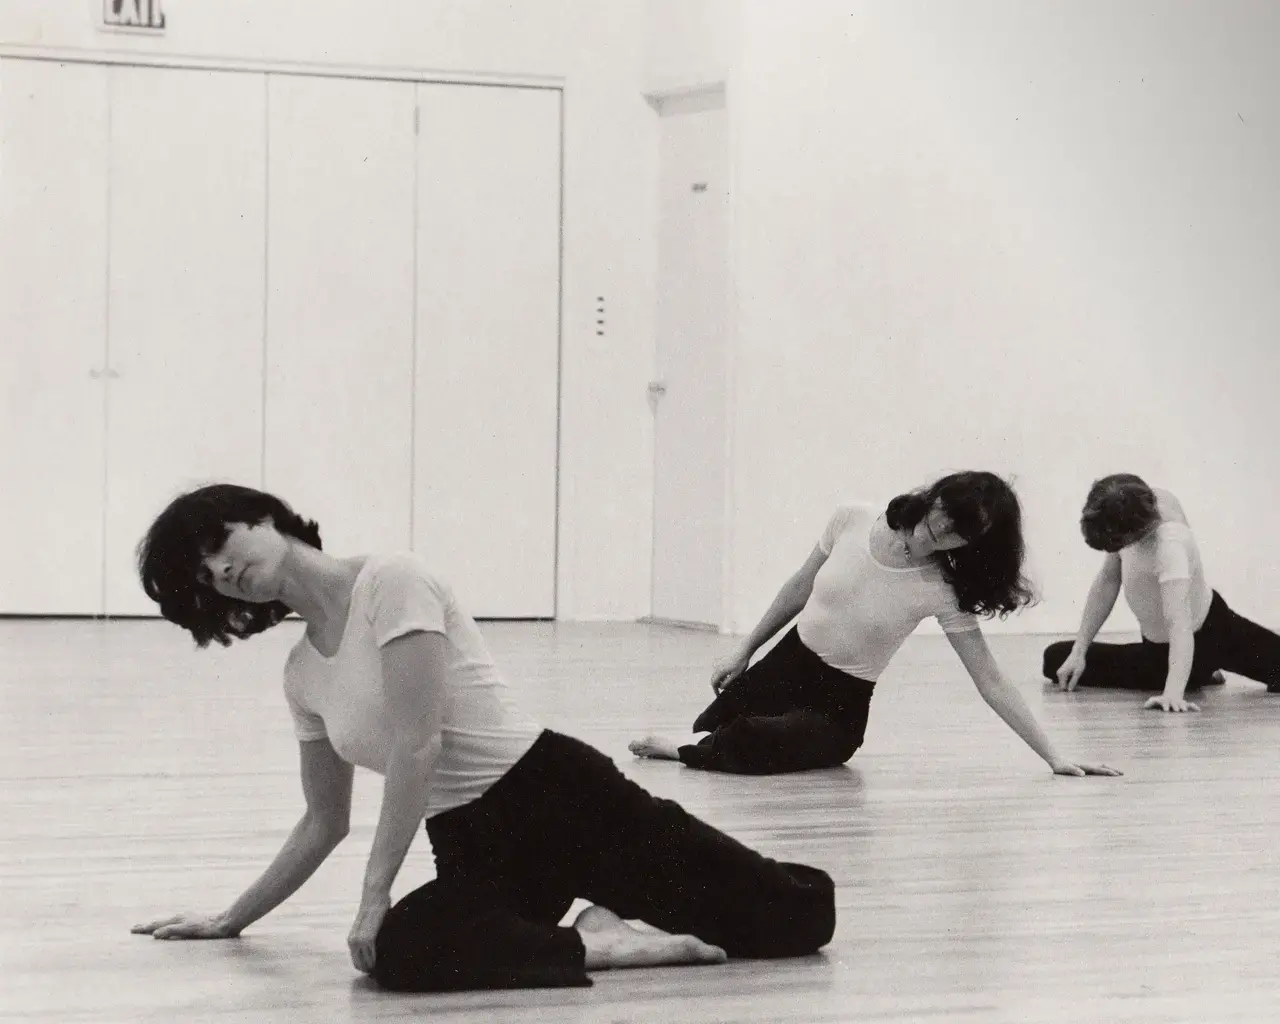 Reclining Rondo, choreographed by Lucinda Childs. Dancers: Judy Padow, Susan Brody, and David Woodberry. This photo was taken in Childs&rsquo; loft. Photo &copy; 1975 Babette Mangolte. Courtesy of the artist and Gallery 1602, New York.